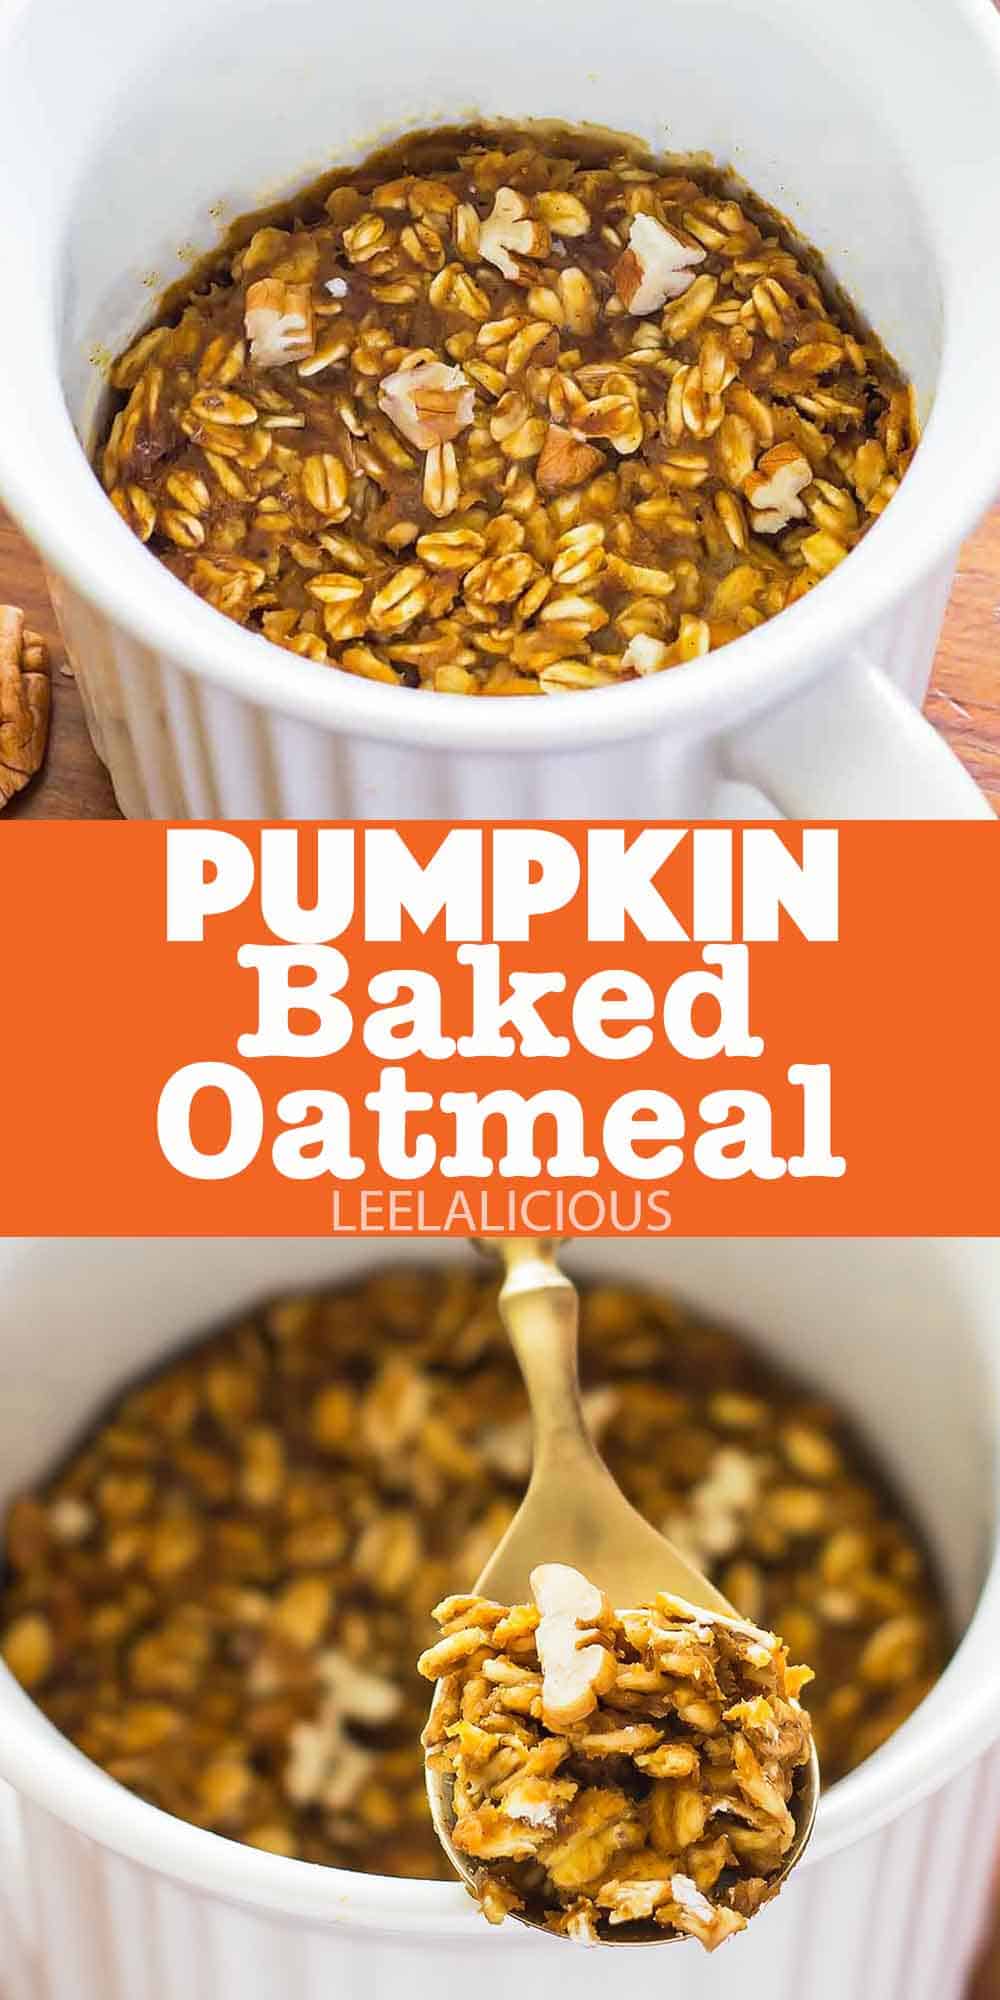 Single serving of pumpkin baked oatmeal in a mug and on a spoon